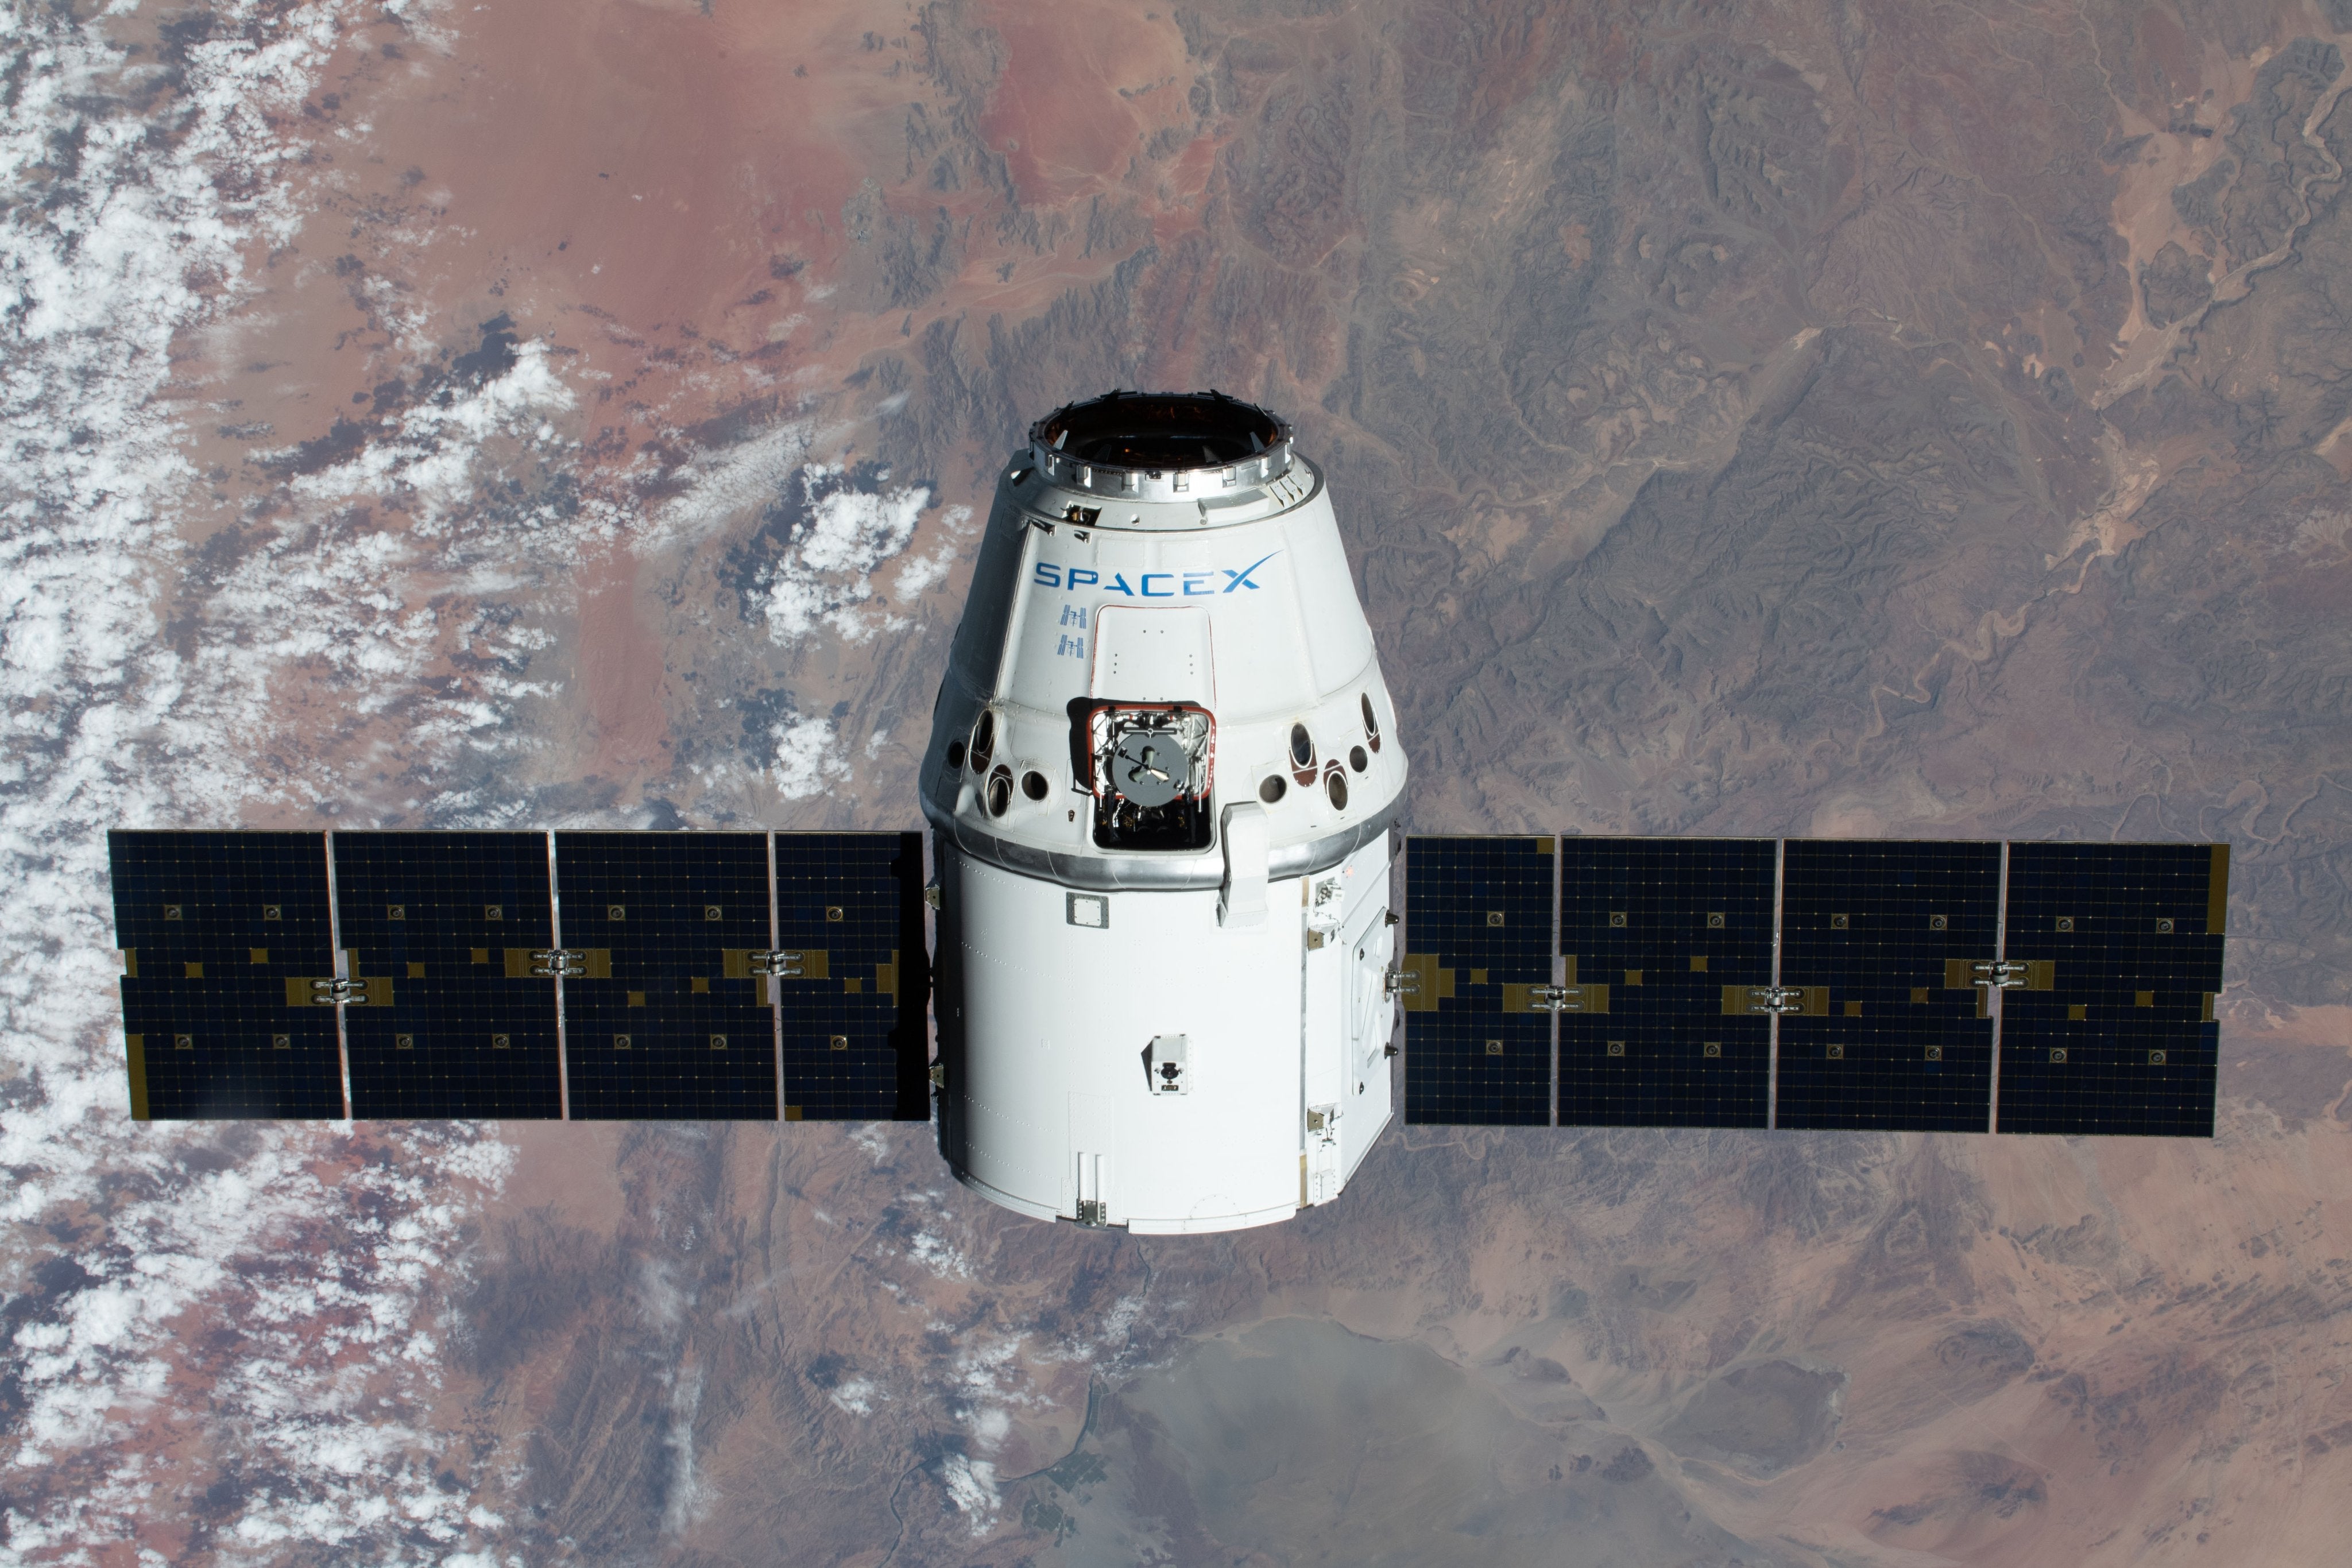 SpaceX Dragon returns from the Space Station tomorrow, its final splashdown will mark the end of an era -Watch It Live!